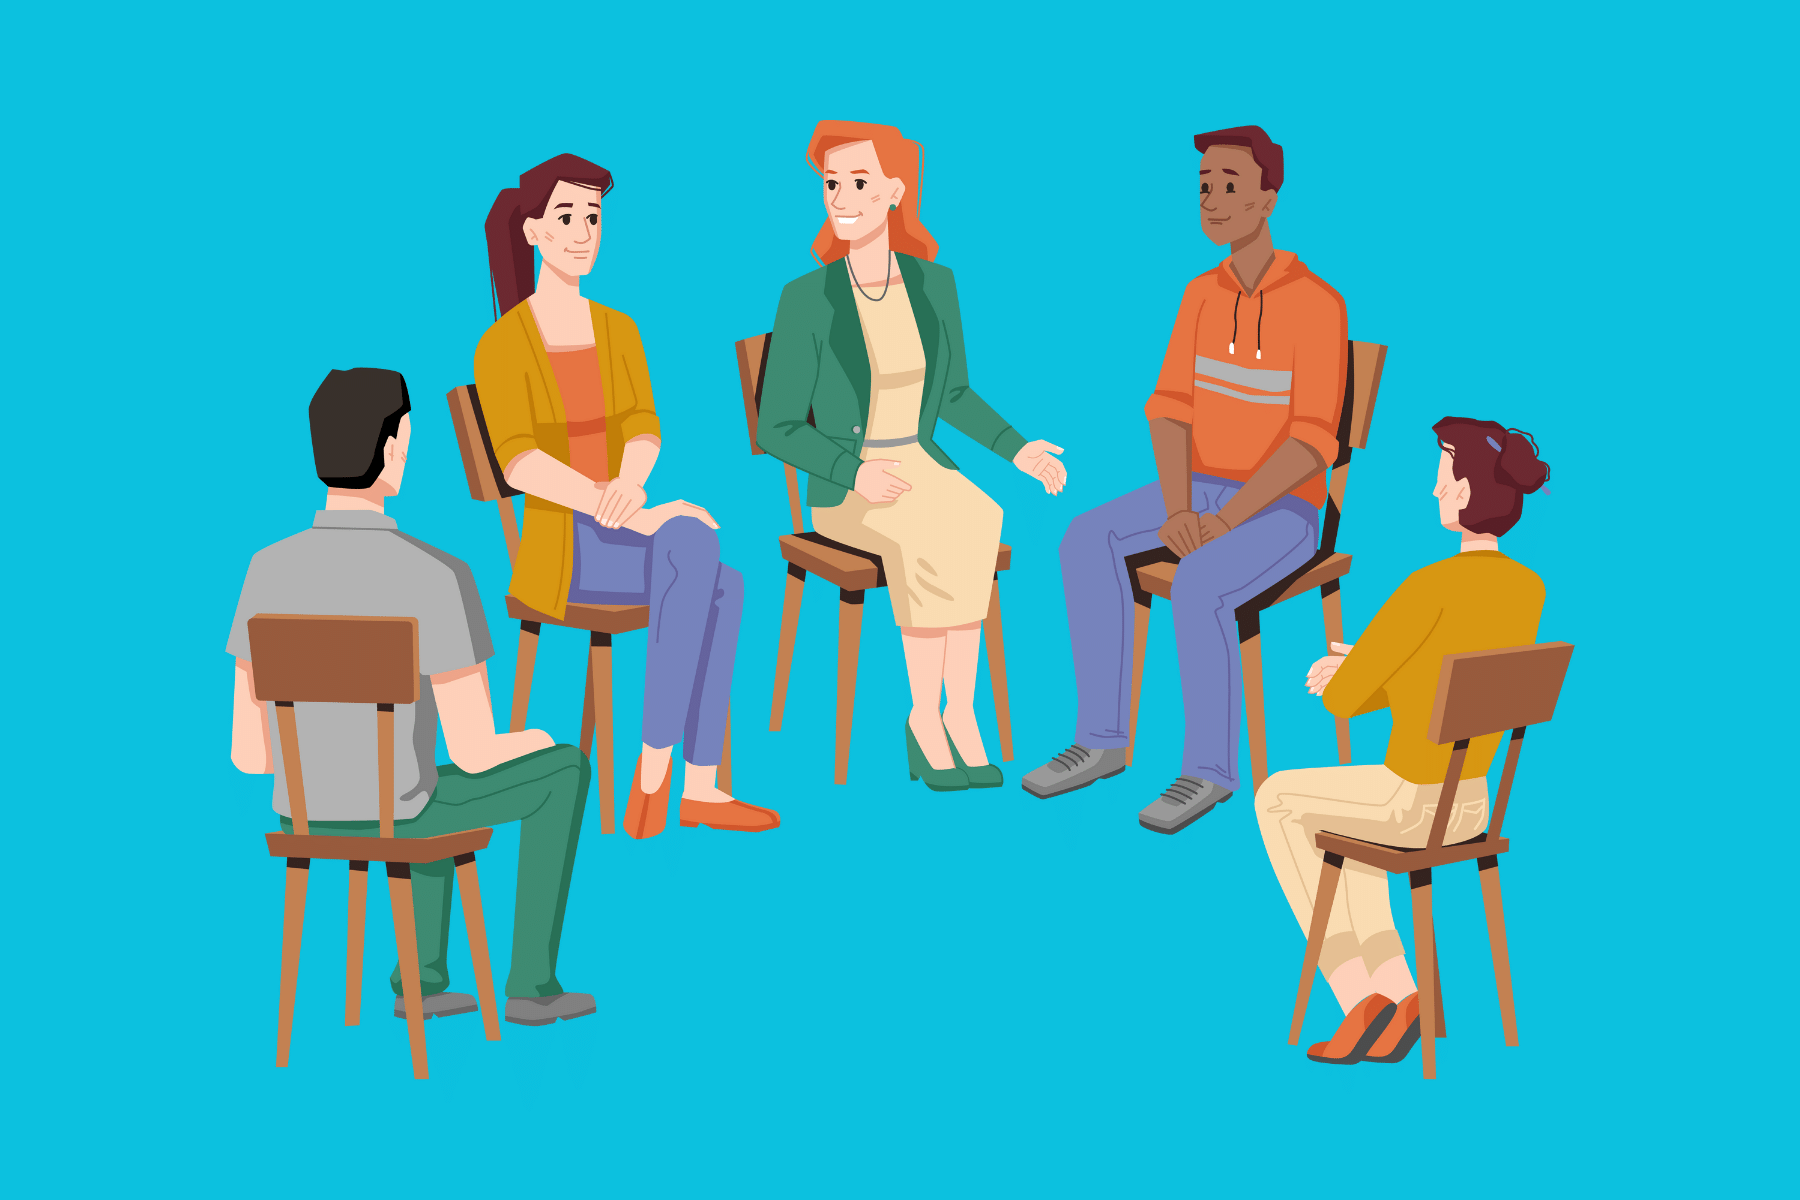 drawing of 6 people sitting in chairs in a circle all of different genders, sizes and races